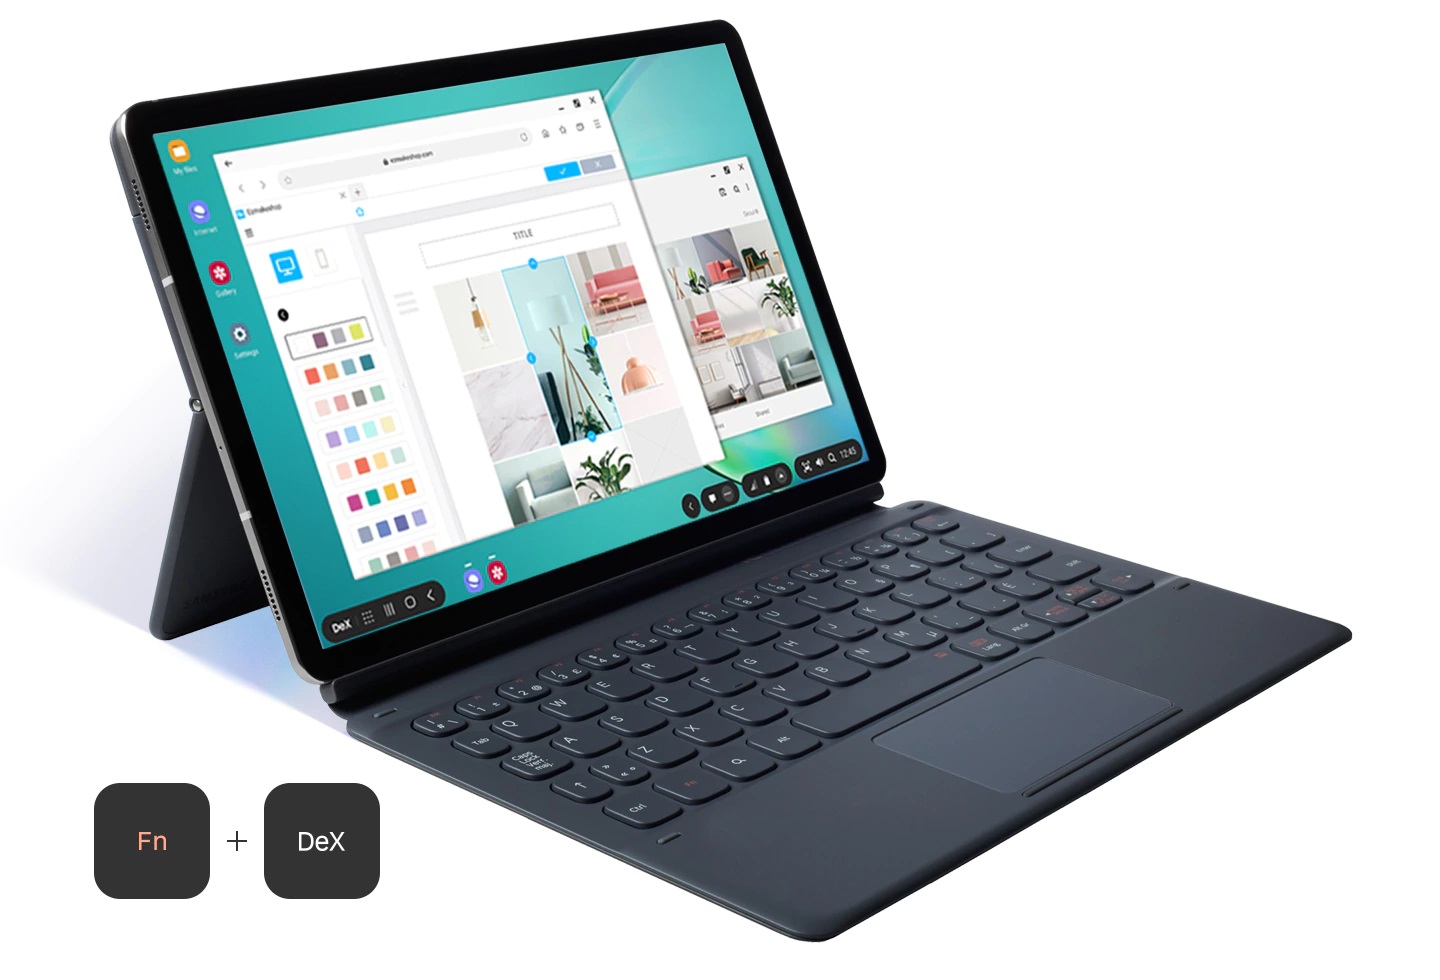 keyboard to a tablet